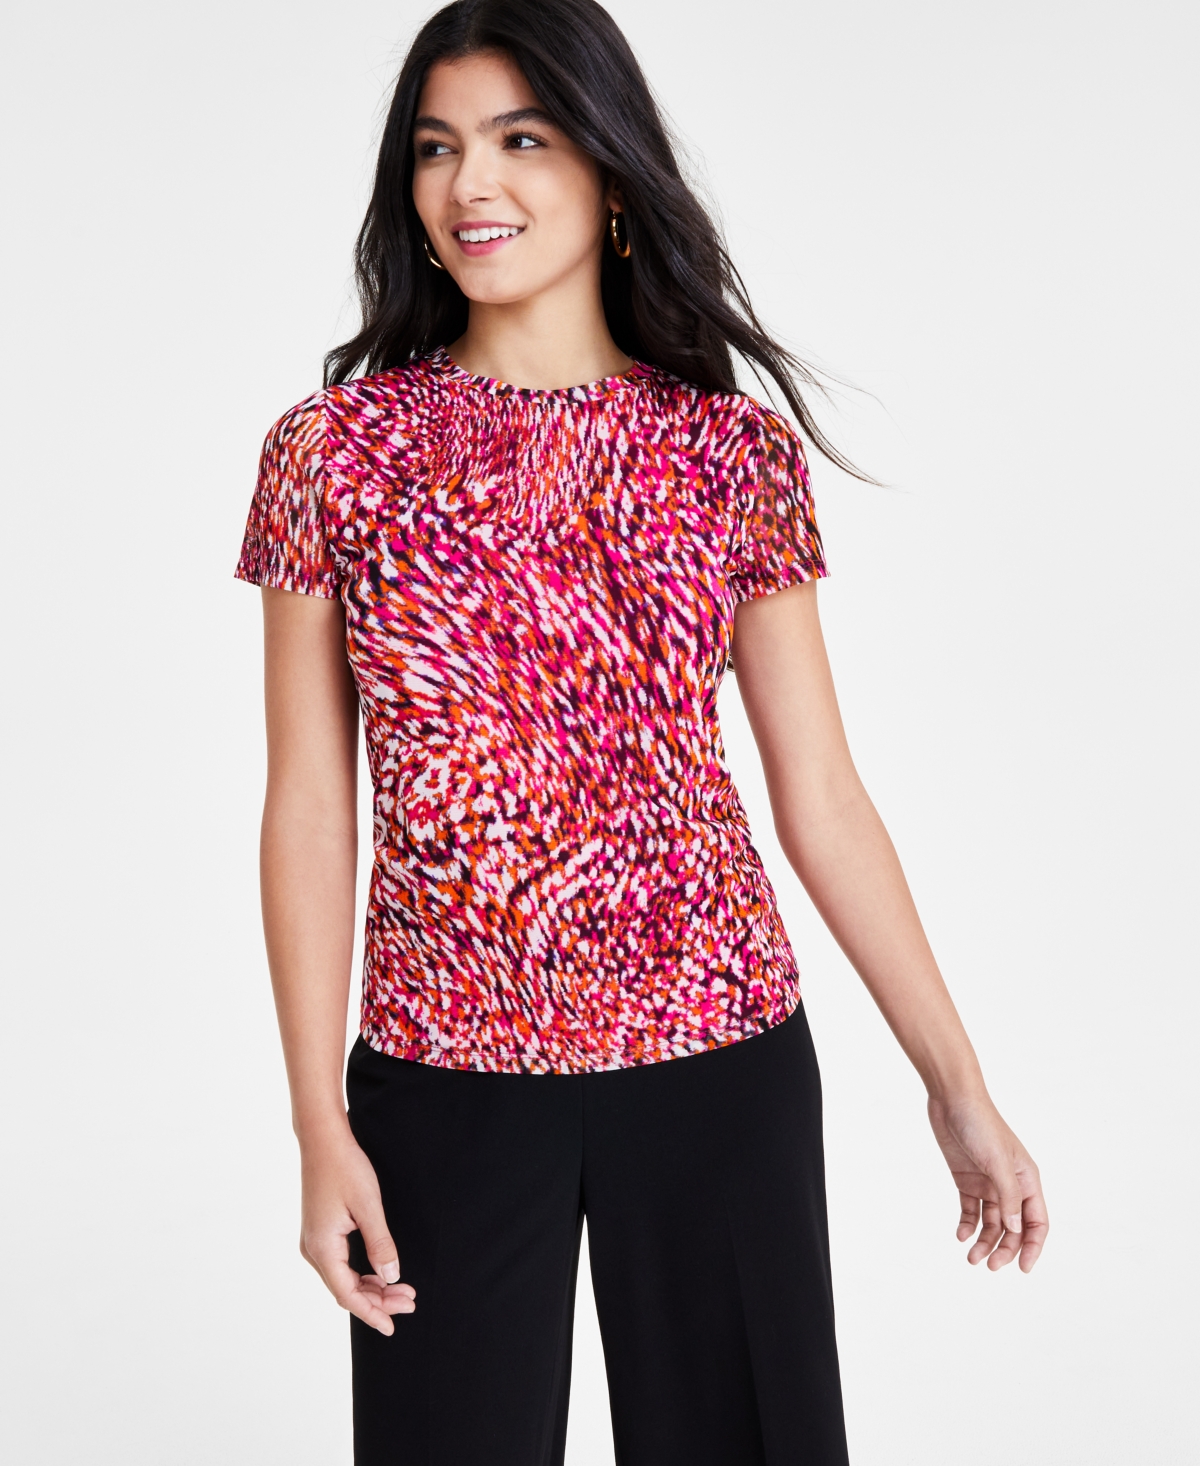 Women's Printed Short-Sleeve Mesh Top, Created for Macy's - Sunset Rose